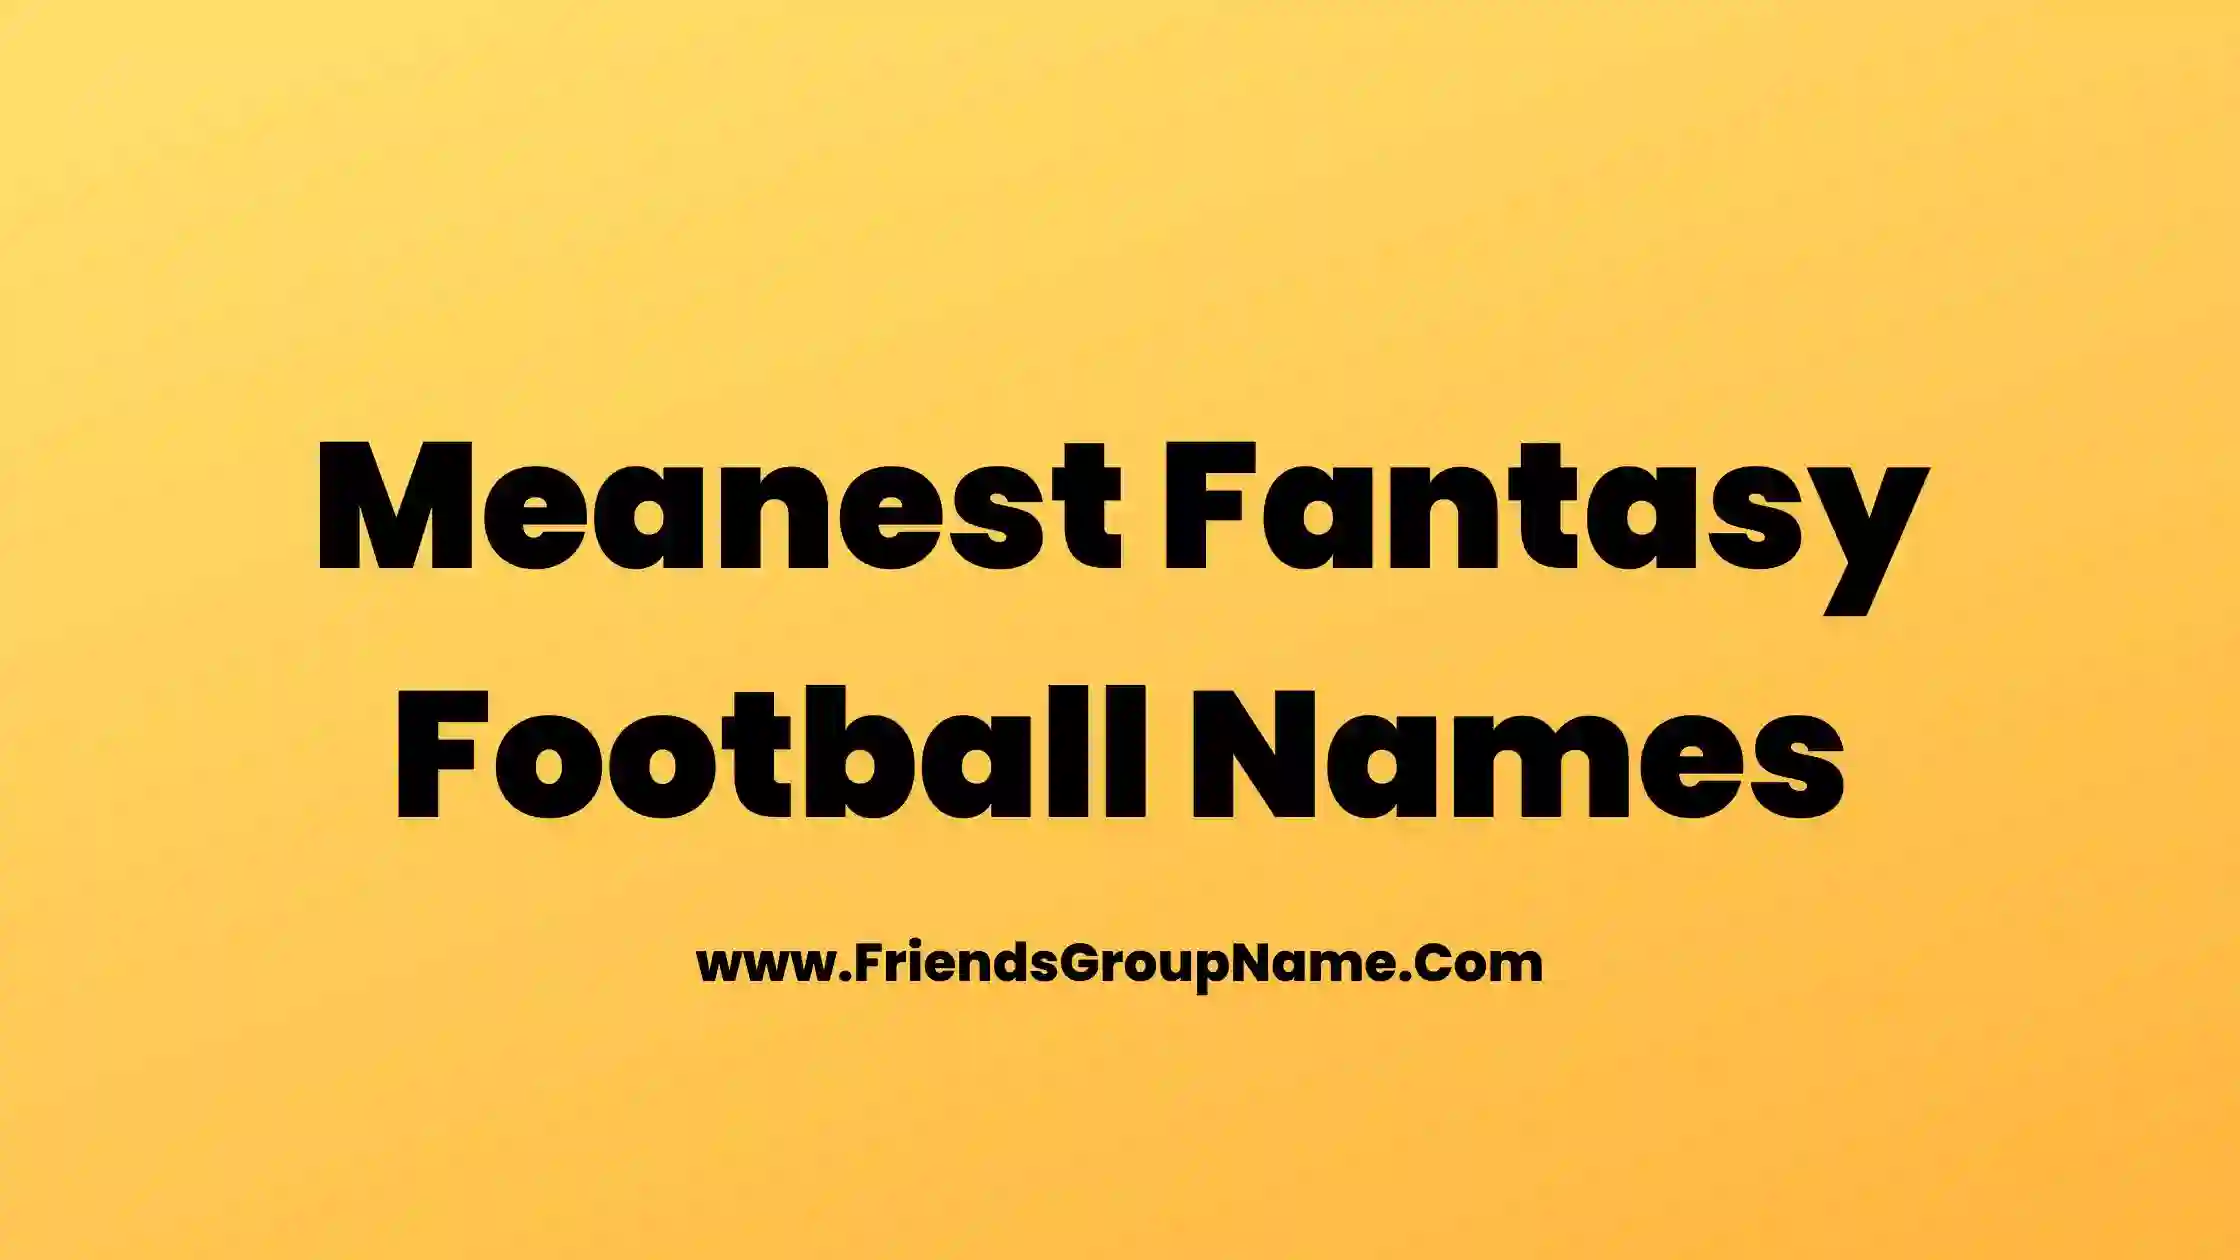 Meanest Fantasy Football Names